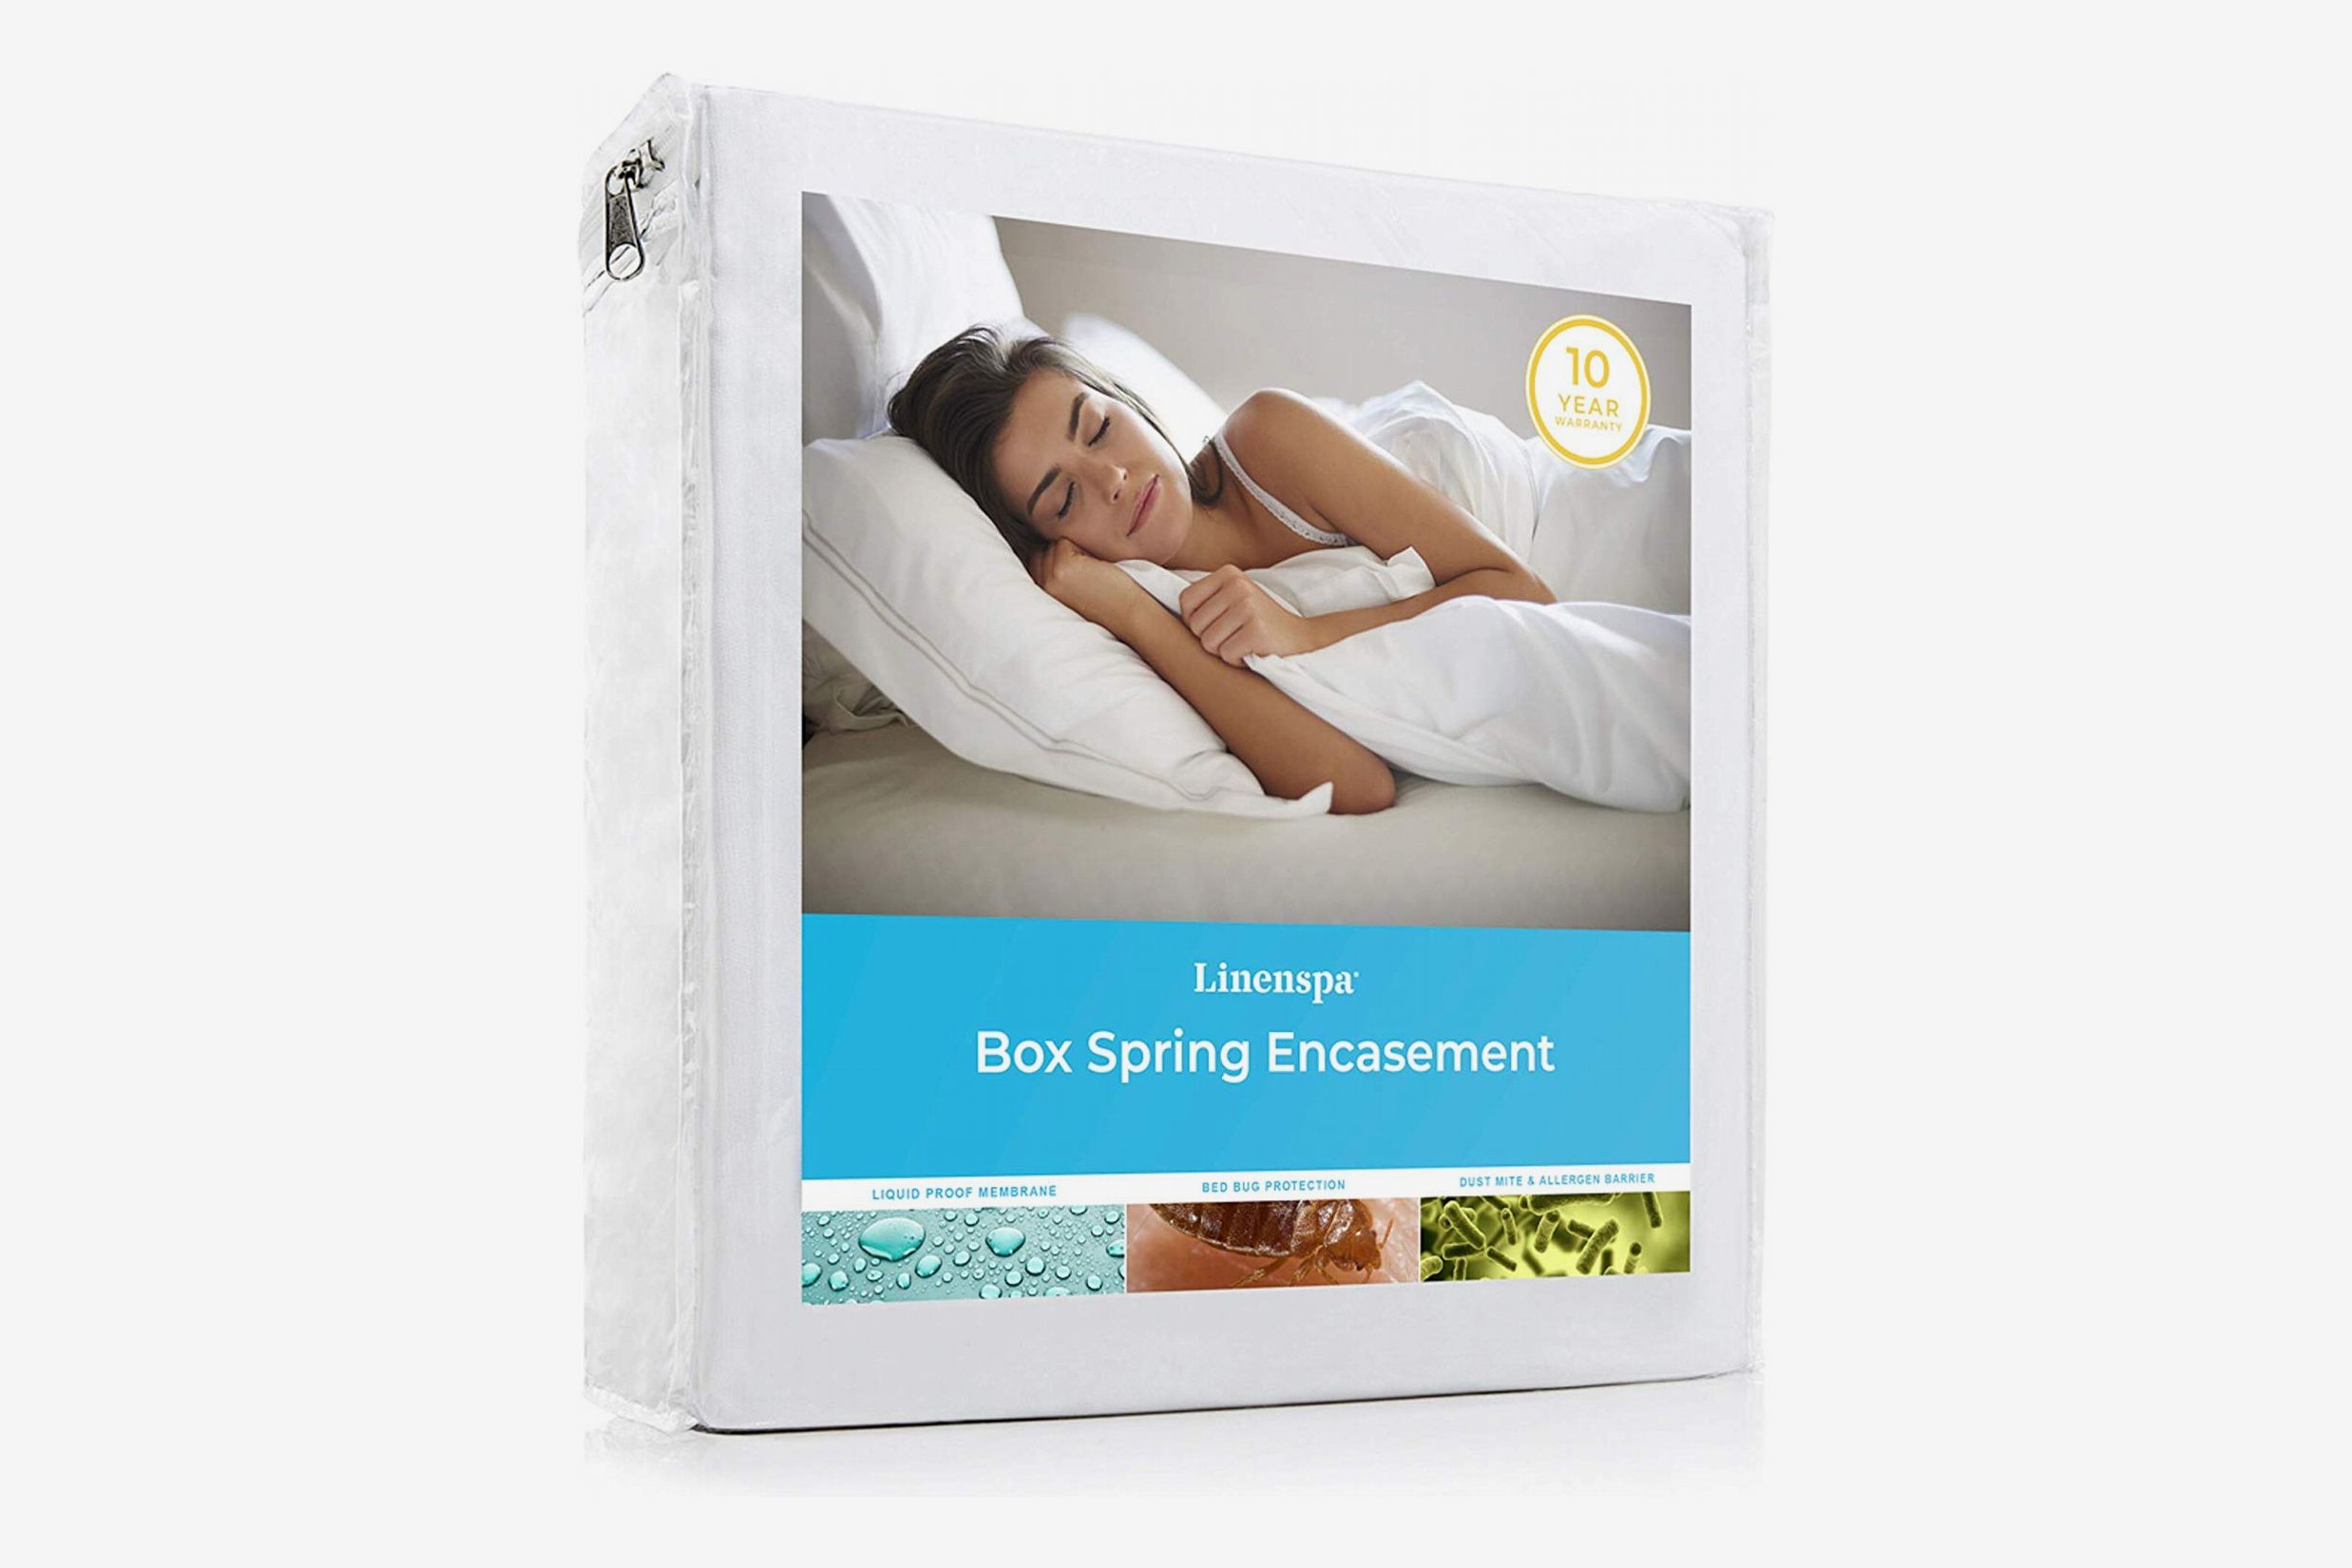 5 Best Bedbug Mattress Cover 2020 The, Does Bed Bug Protector Work